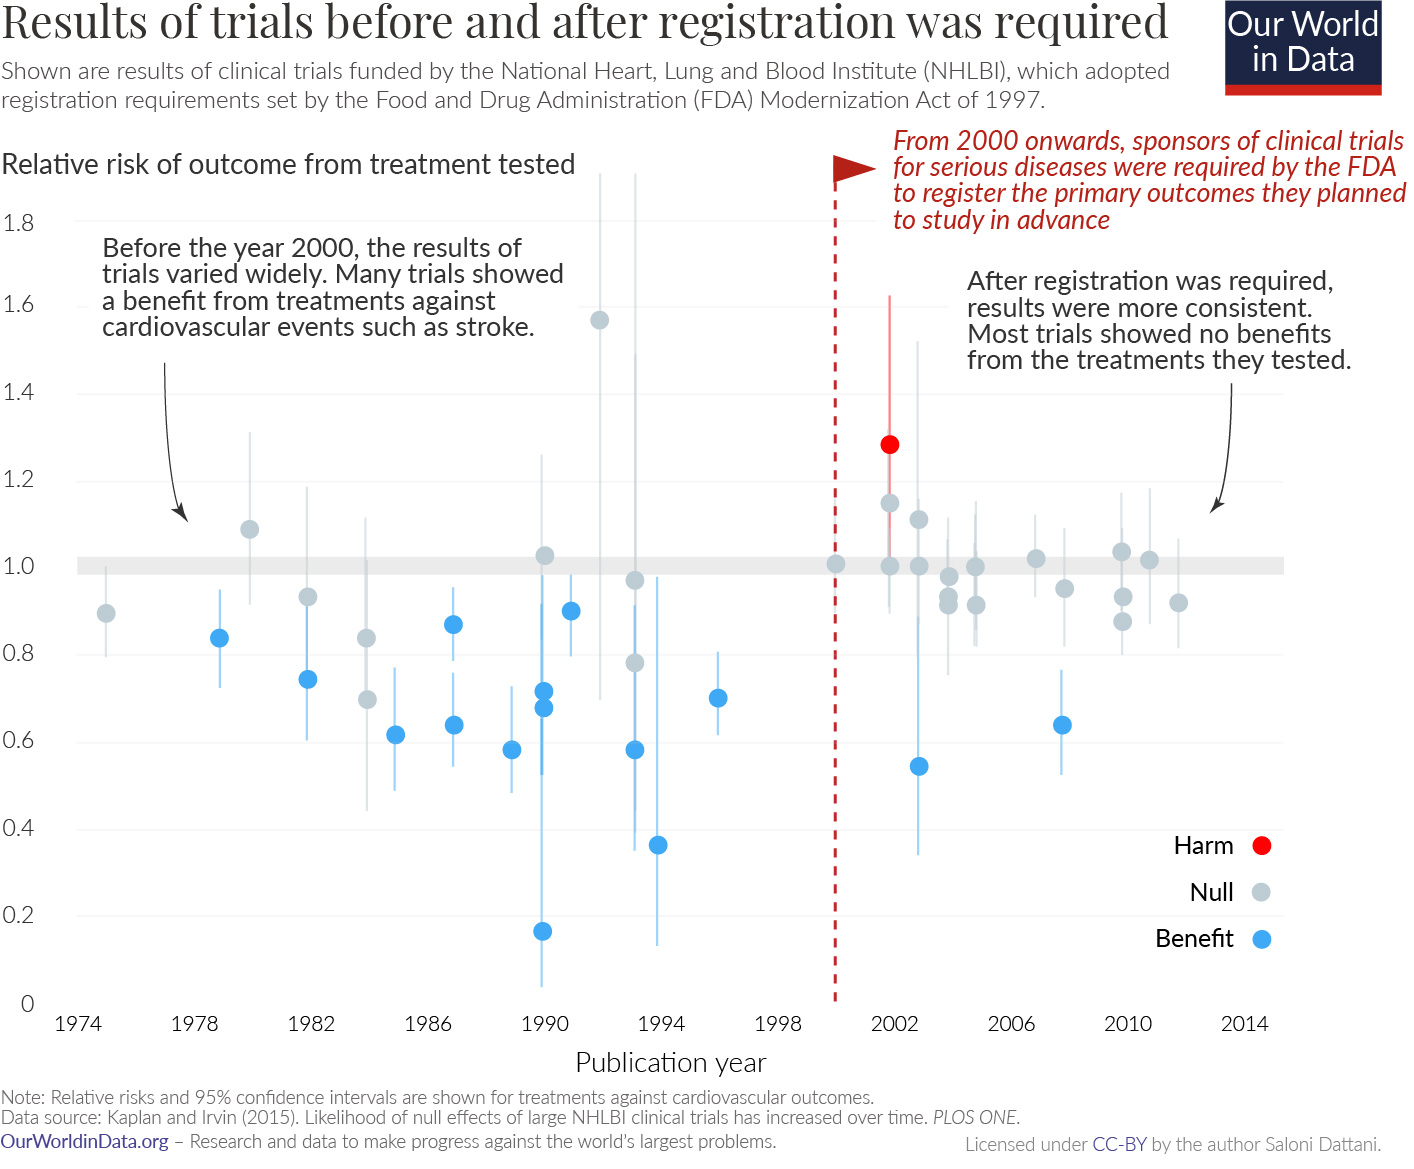 Efficacy in trials before and after registration requirement2